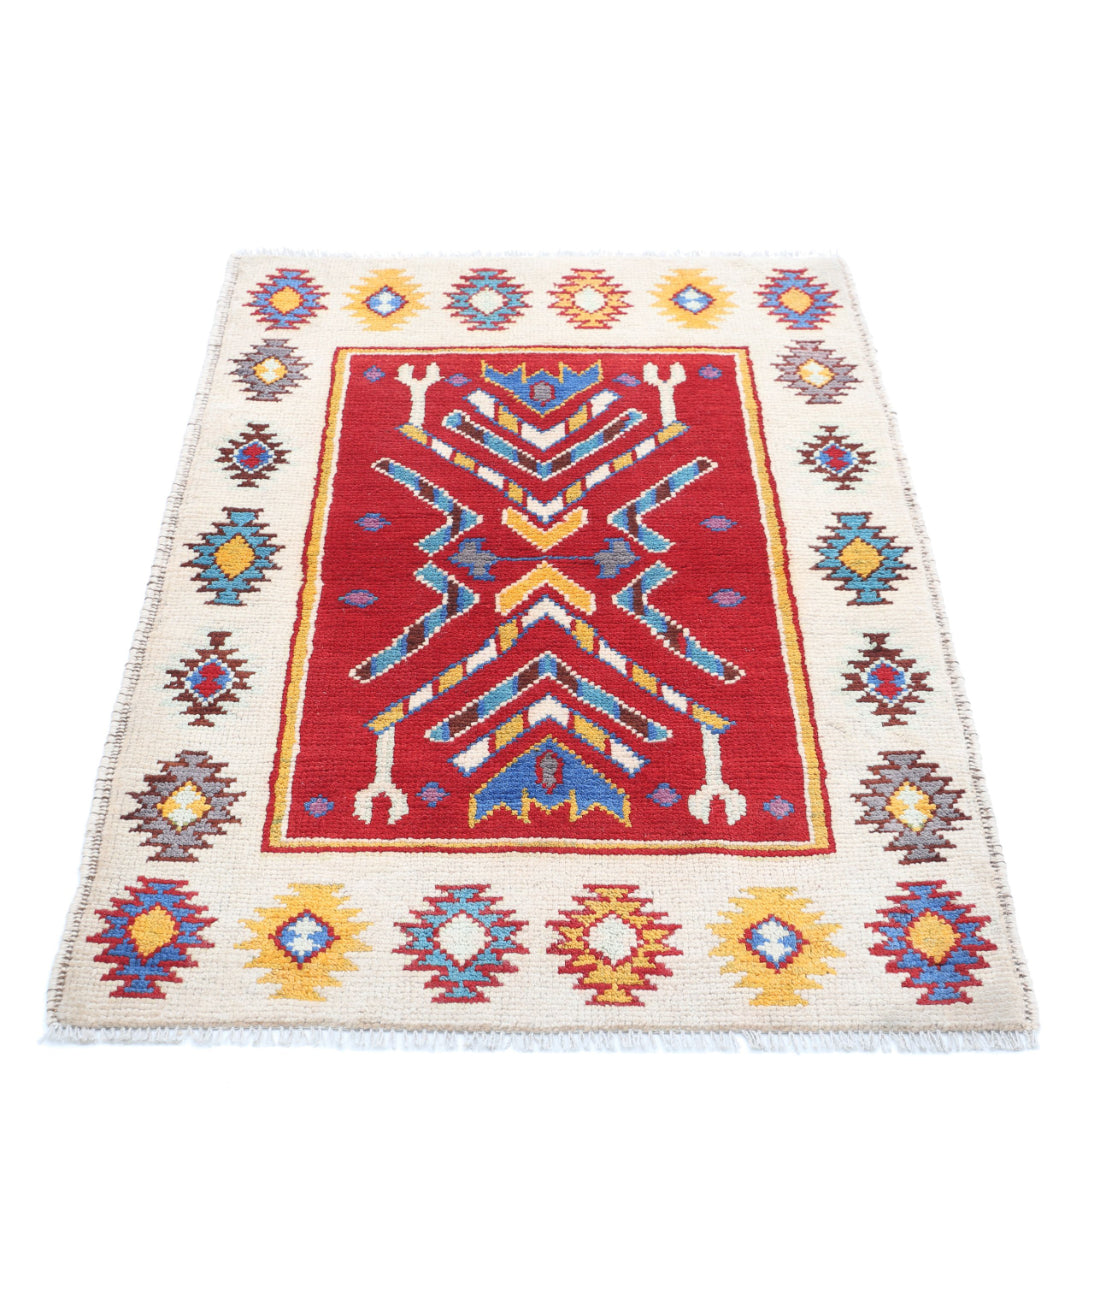 Revival 2'6'' X 3'10'' Hand-Knotted Wool Rug 2'6'' x 3'10'' (75 X 115) / Red / Ivory